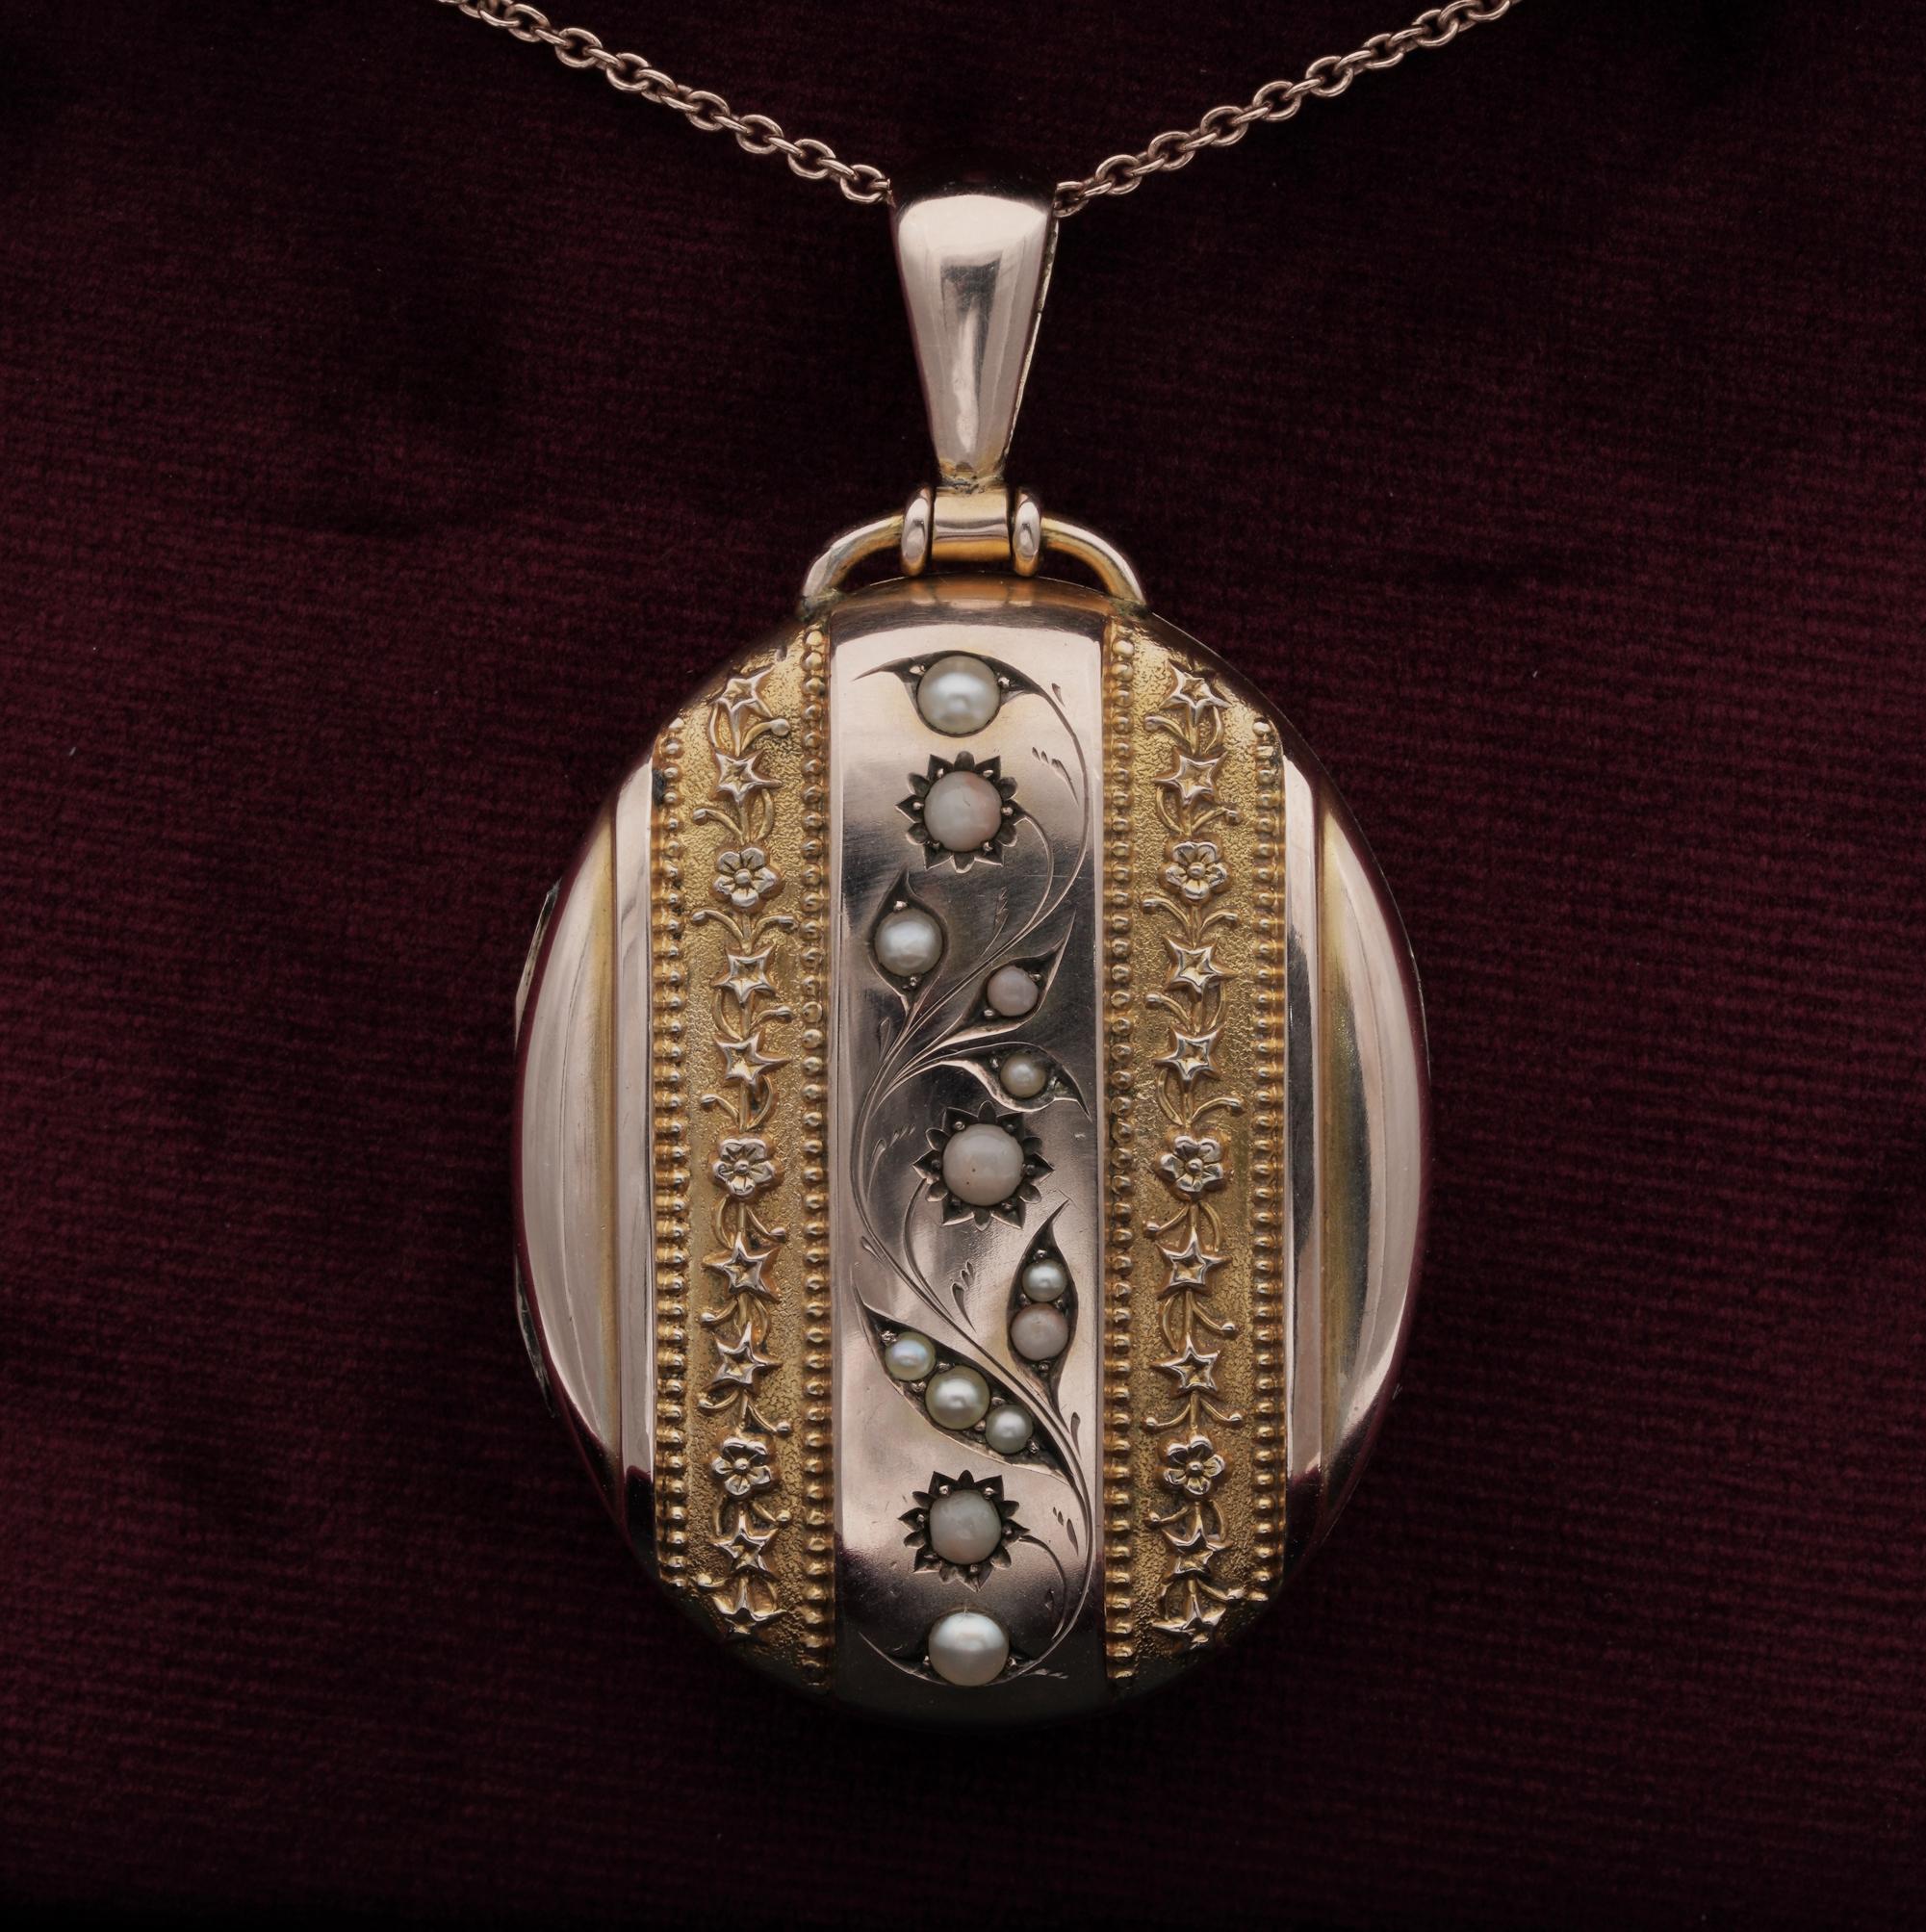 Secret Keeper

An impressive Victorian era locket , made of solid 18 KT gold, tested
Beautifully decorated with embossed flowers on matt gold beside a centre panel engraved with naturalistic Flower and leaf work enhanced with Split Pearls and Coral